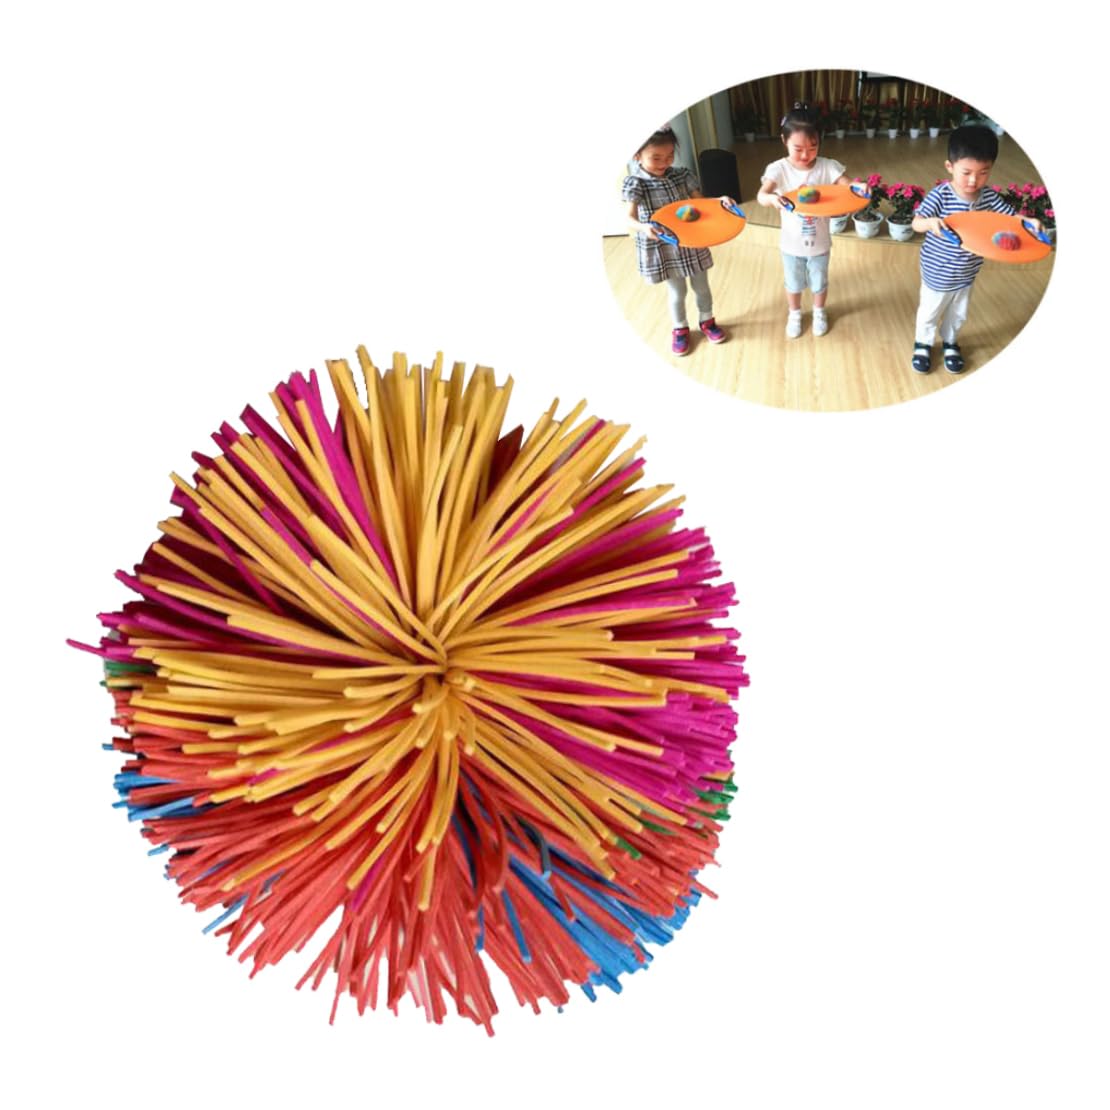 Neroyaner Monkey Stringy Balls Colorful Bouncy Ball Rainbow Pom Ball Soft Active Fun Toy Antistress Toy Balls for Men Women Room Decor